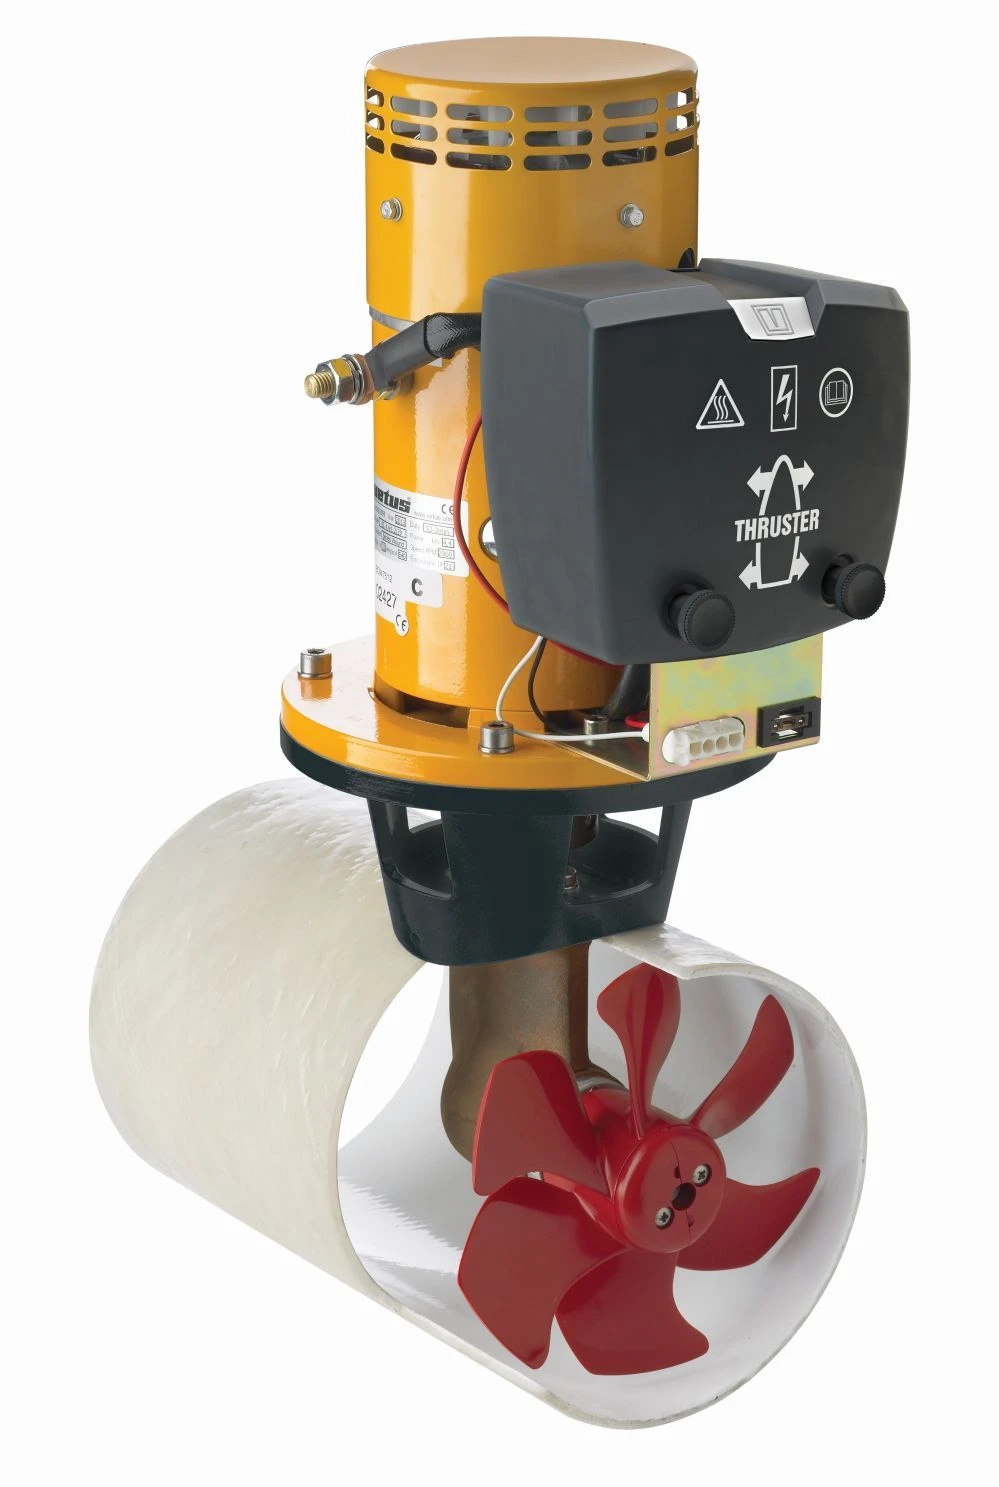 Bow Thruster 80 kgf 12 V 185 mm Tunnel